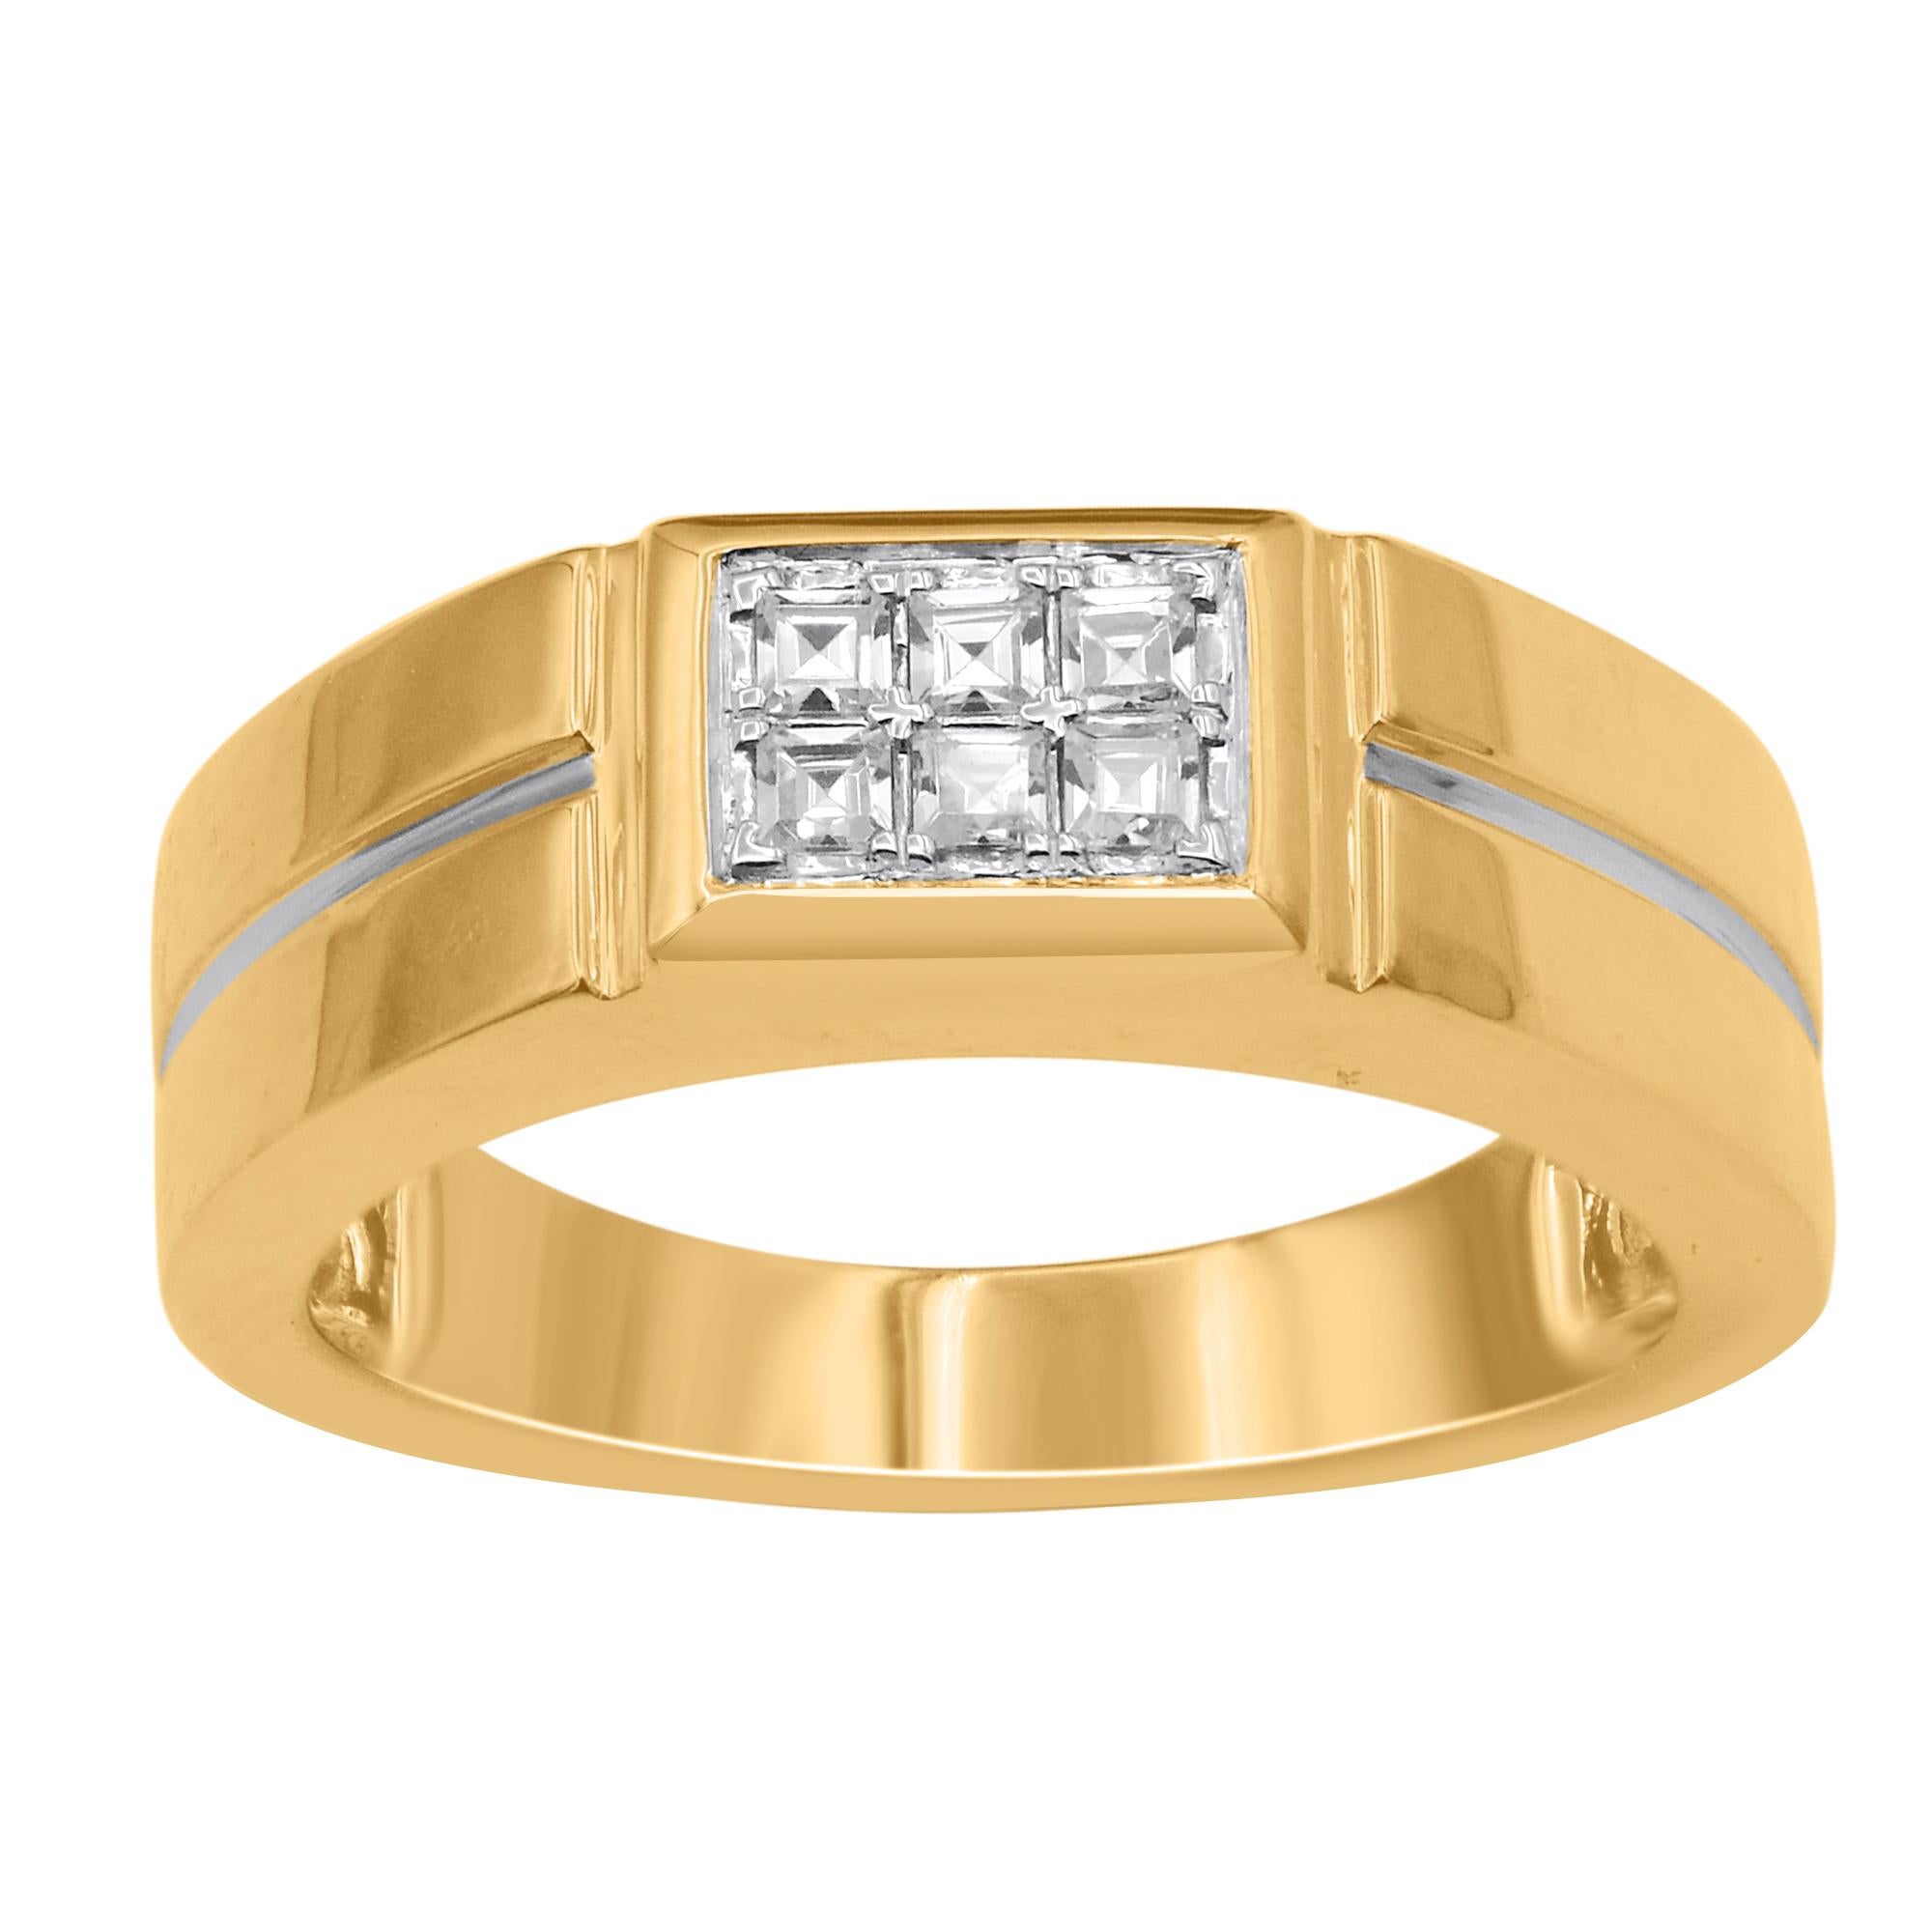 TJD 0.30 Carat Princess Cut Diamond 14KT Yellow Gold Men's Wedding Band Ring In New Condition For Sale In New York, NY